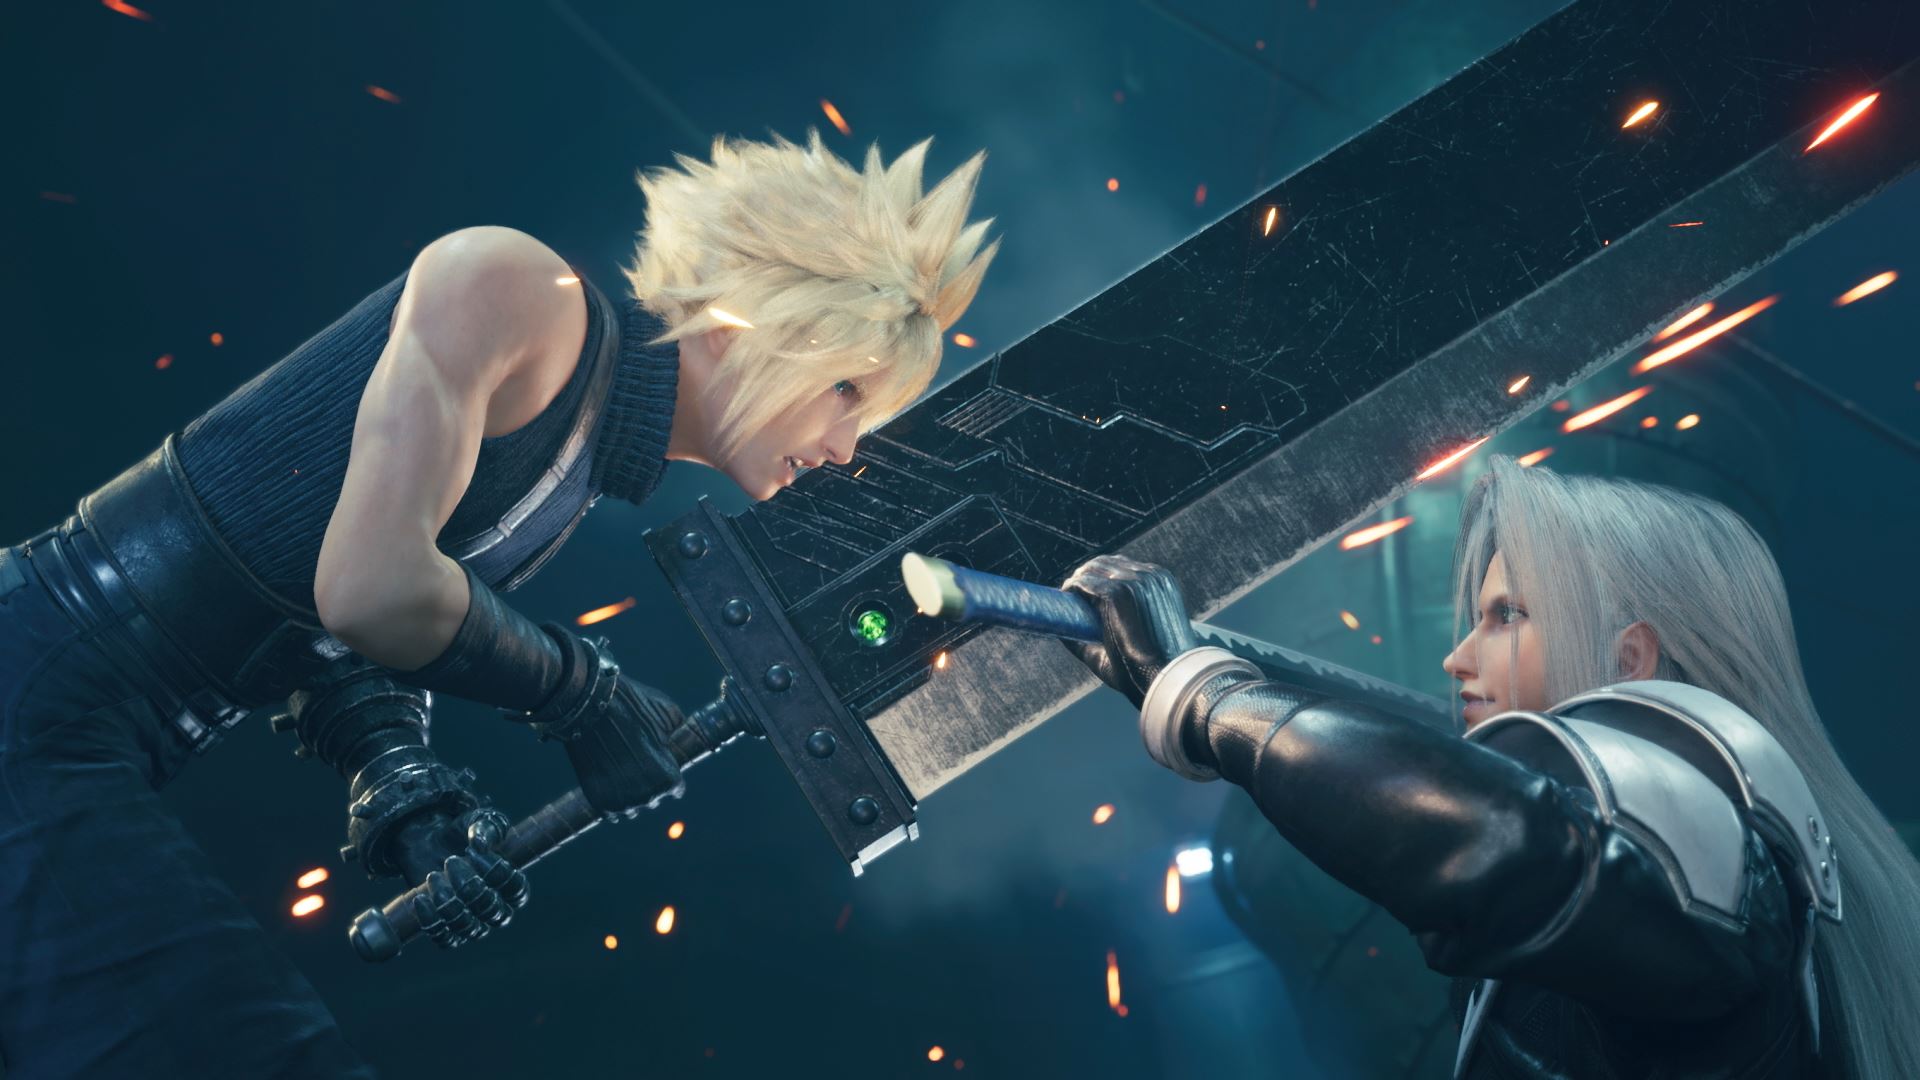 Cloud Strife faces off against Sephiroth in a close up screenshot from Final Fantasy 7 remake.